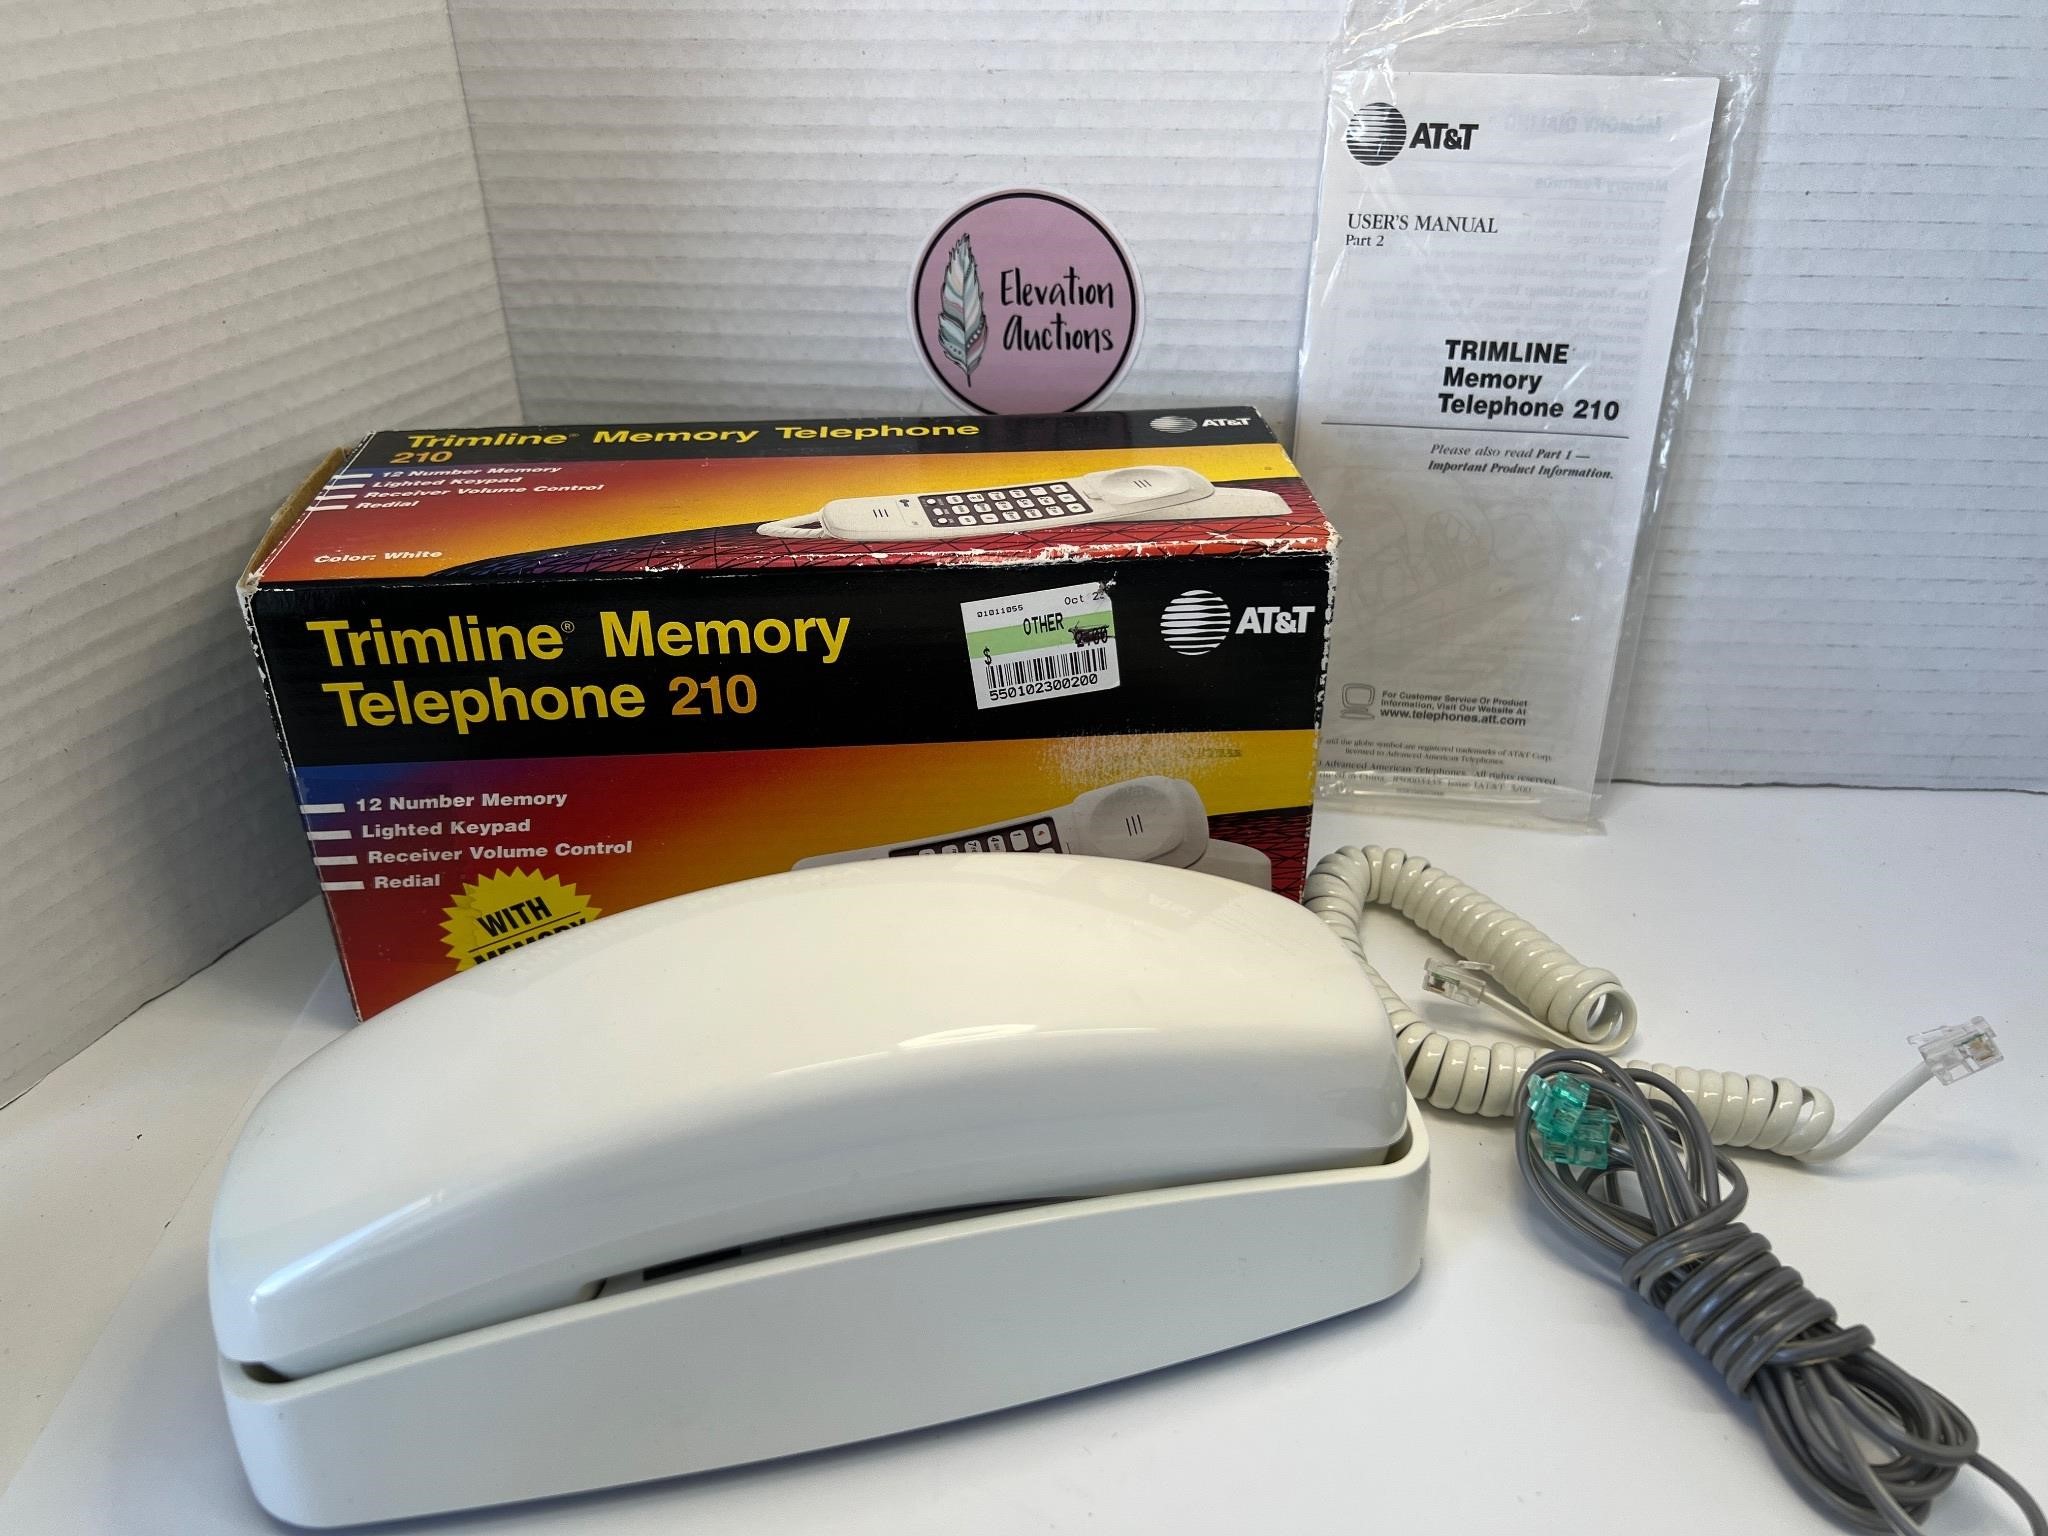 NEW AT&T Trimline Memory Telephone 210